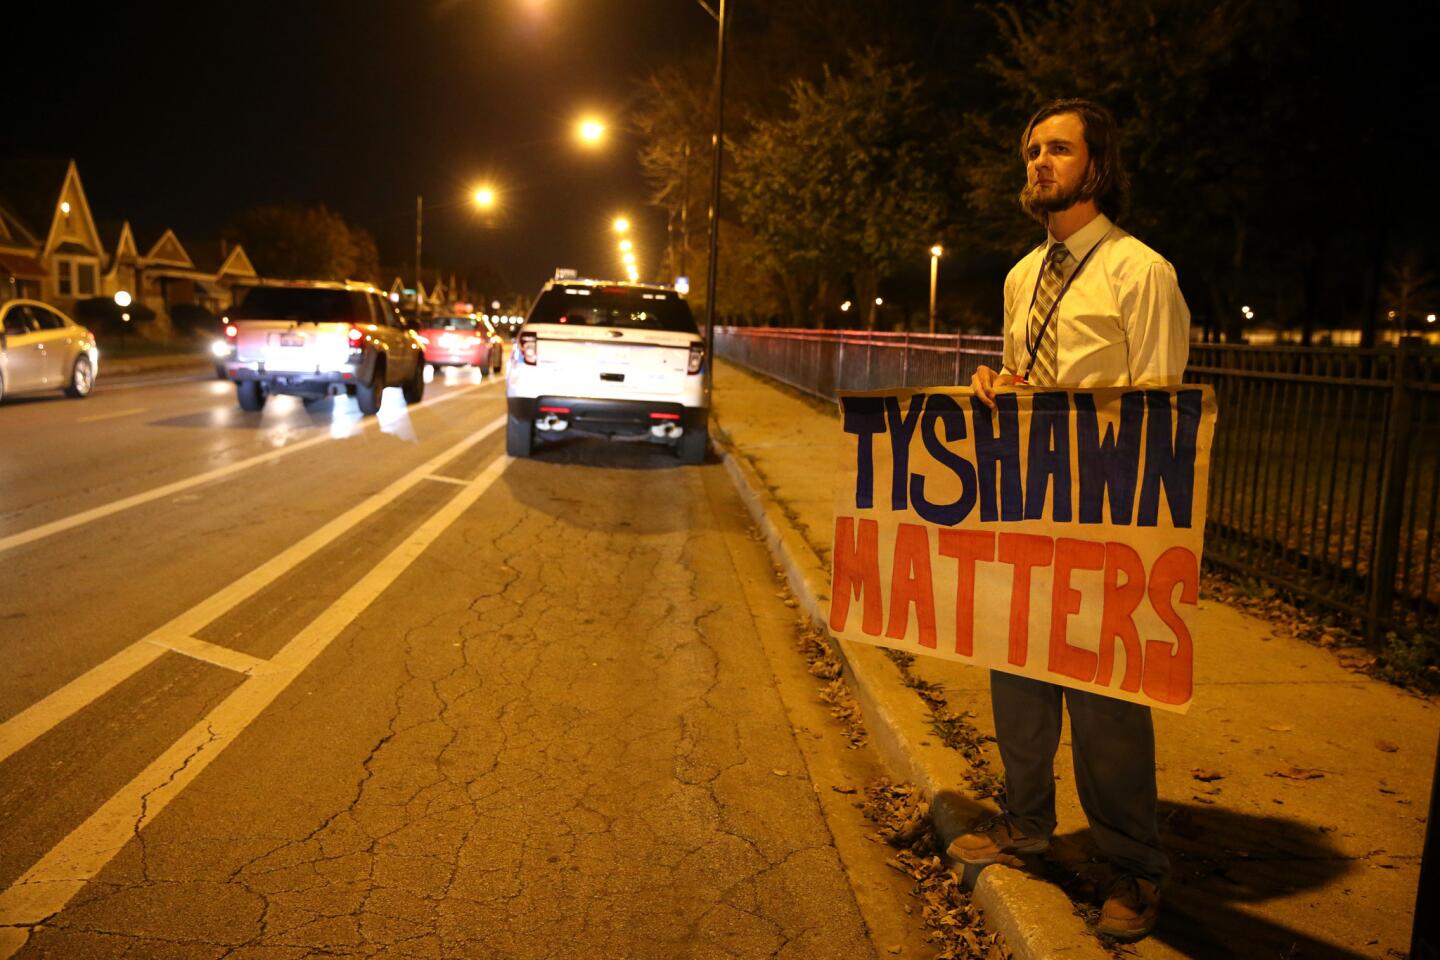 Aaron Fischer holds a sign reading "Tyshawn Matters" while standing in support of the 9-year-old boy Nov. 3, 2015. Tyshawn was shot and killed in an alley near the 8000 block of South Damen Avenue in Chicago on Nov. 2.